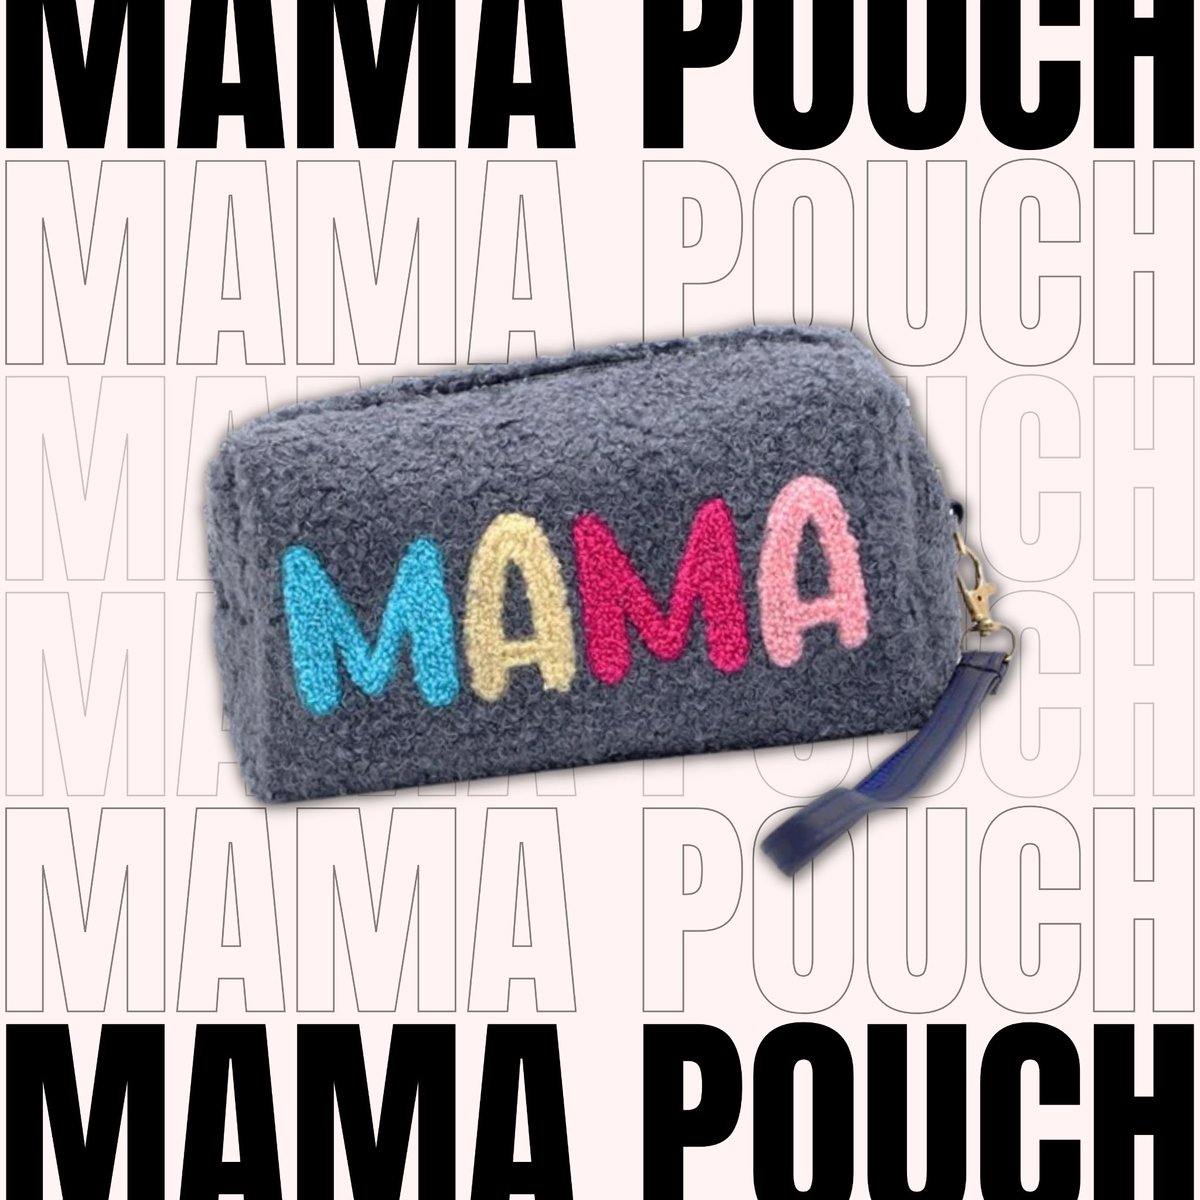 Add some glam to your wardrobe with our Faux Fur Mama Pouch Wristlet! Perfect for carrying your phone, wallet, keys, and other essentials while looking fabulous 💁‍♀️ Get yours today! 💃 thecurvystyle.com/products/fbj2-… . #FluffyWristlet #FashionistaMustHave #GlamOnTheGo